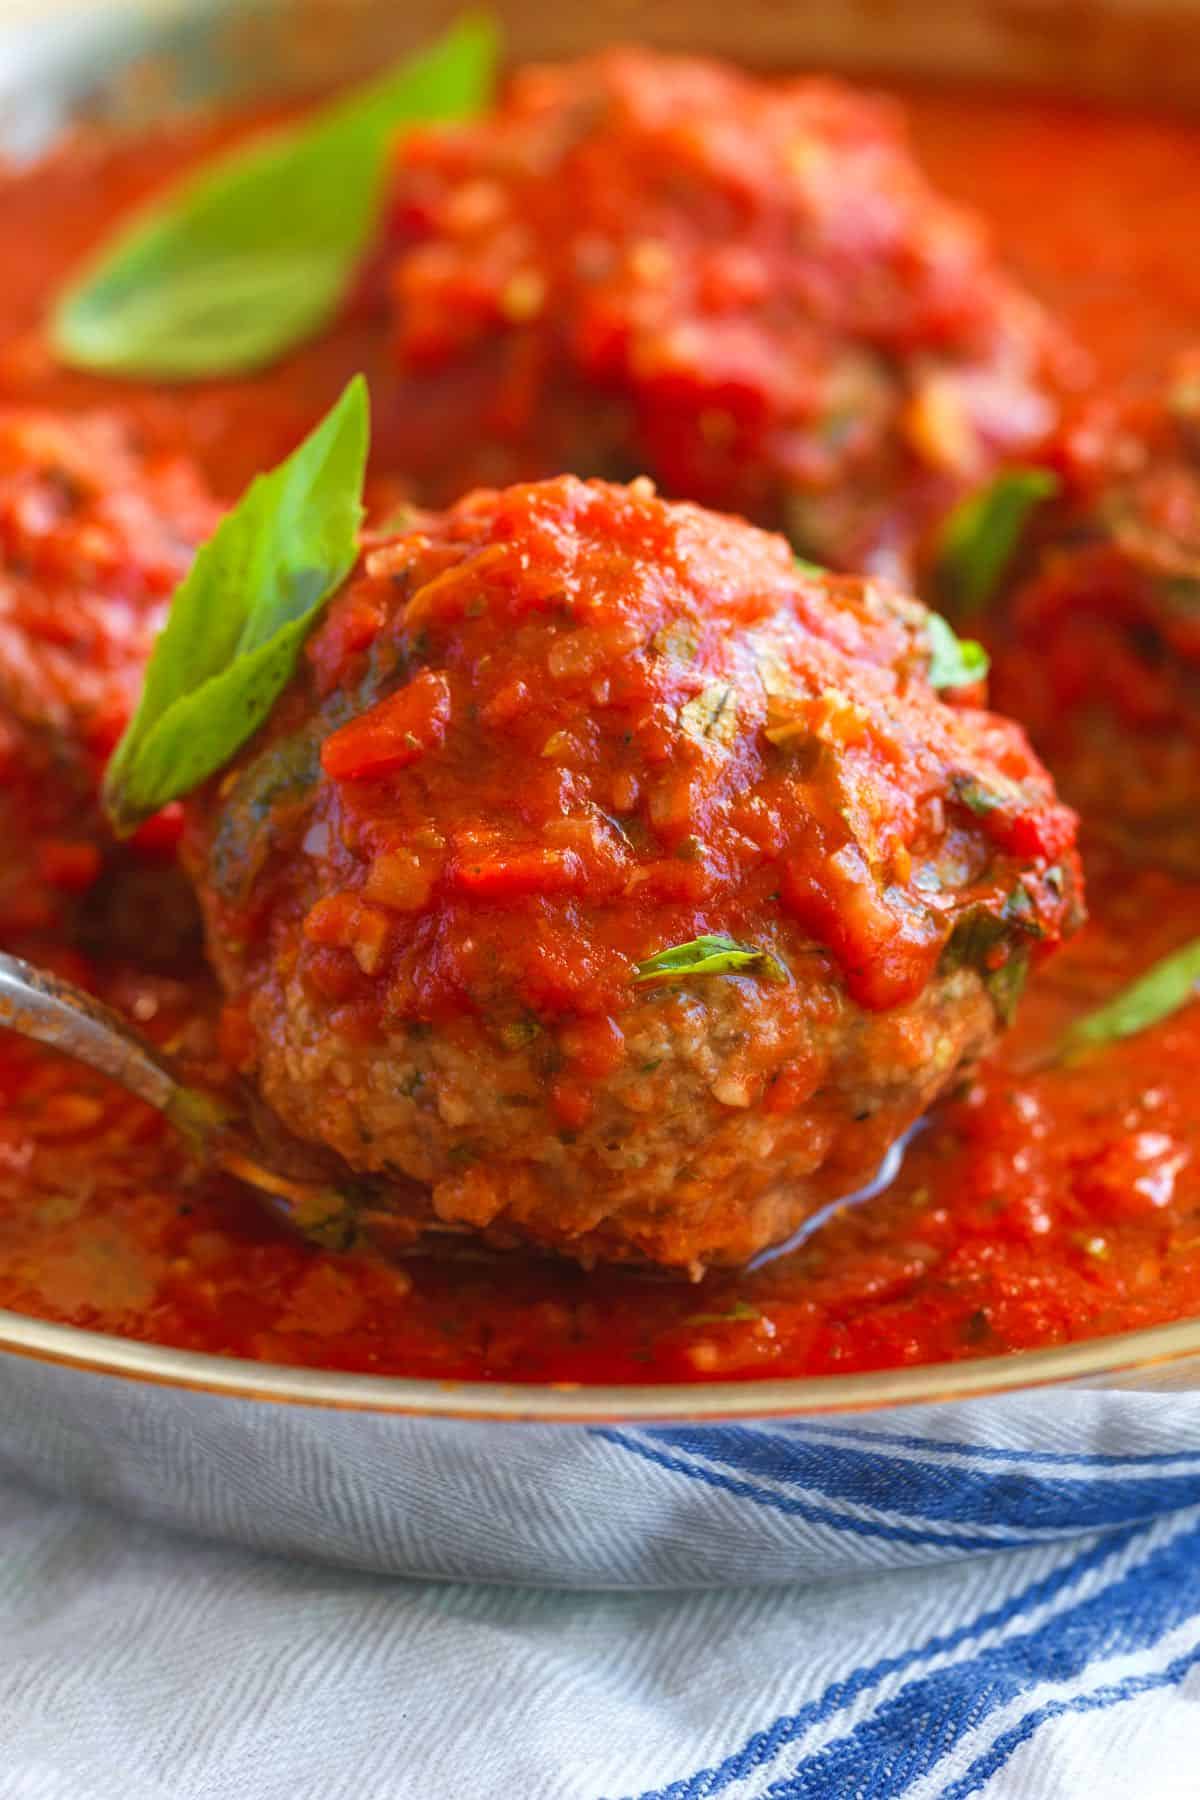 Authentic Italian meatballs cooked with Italian herbs and a tomato sauce.